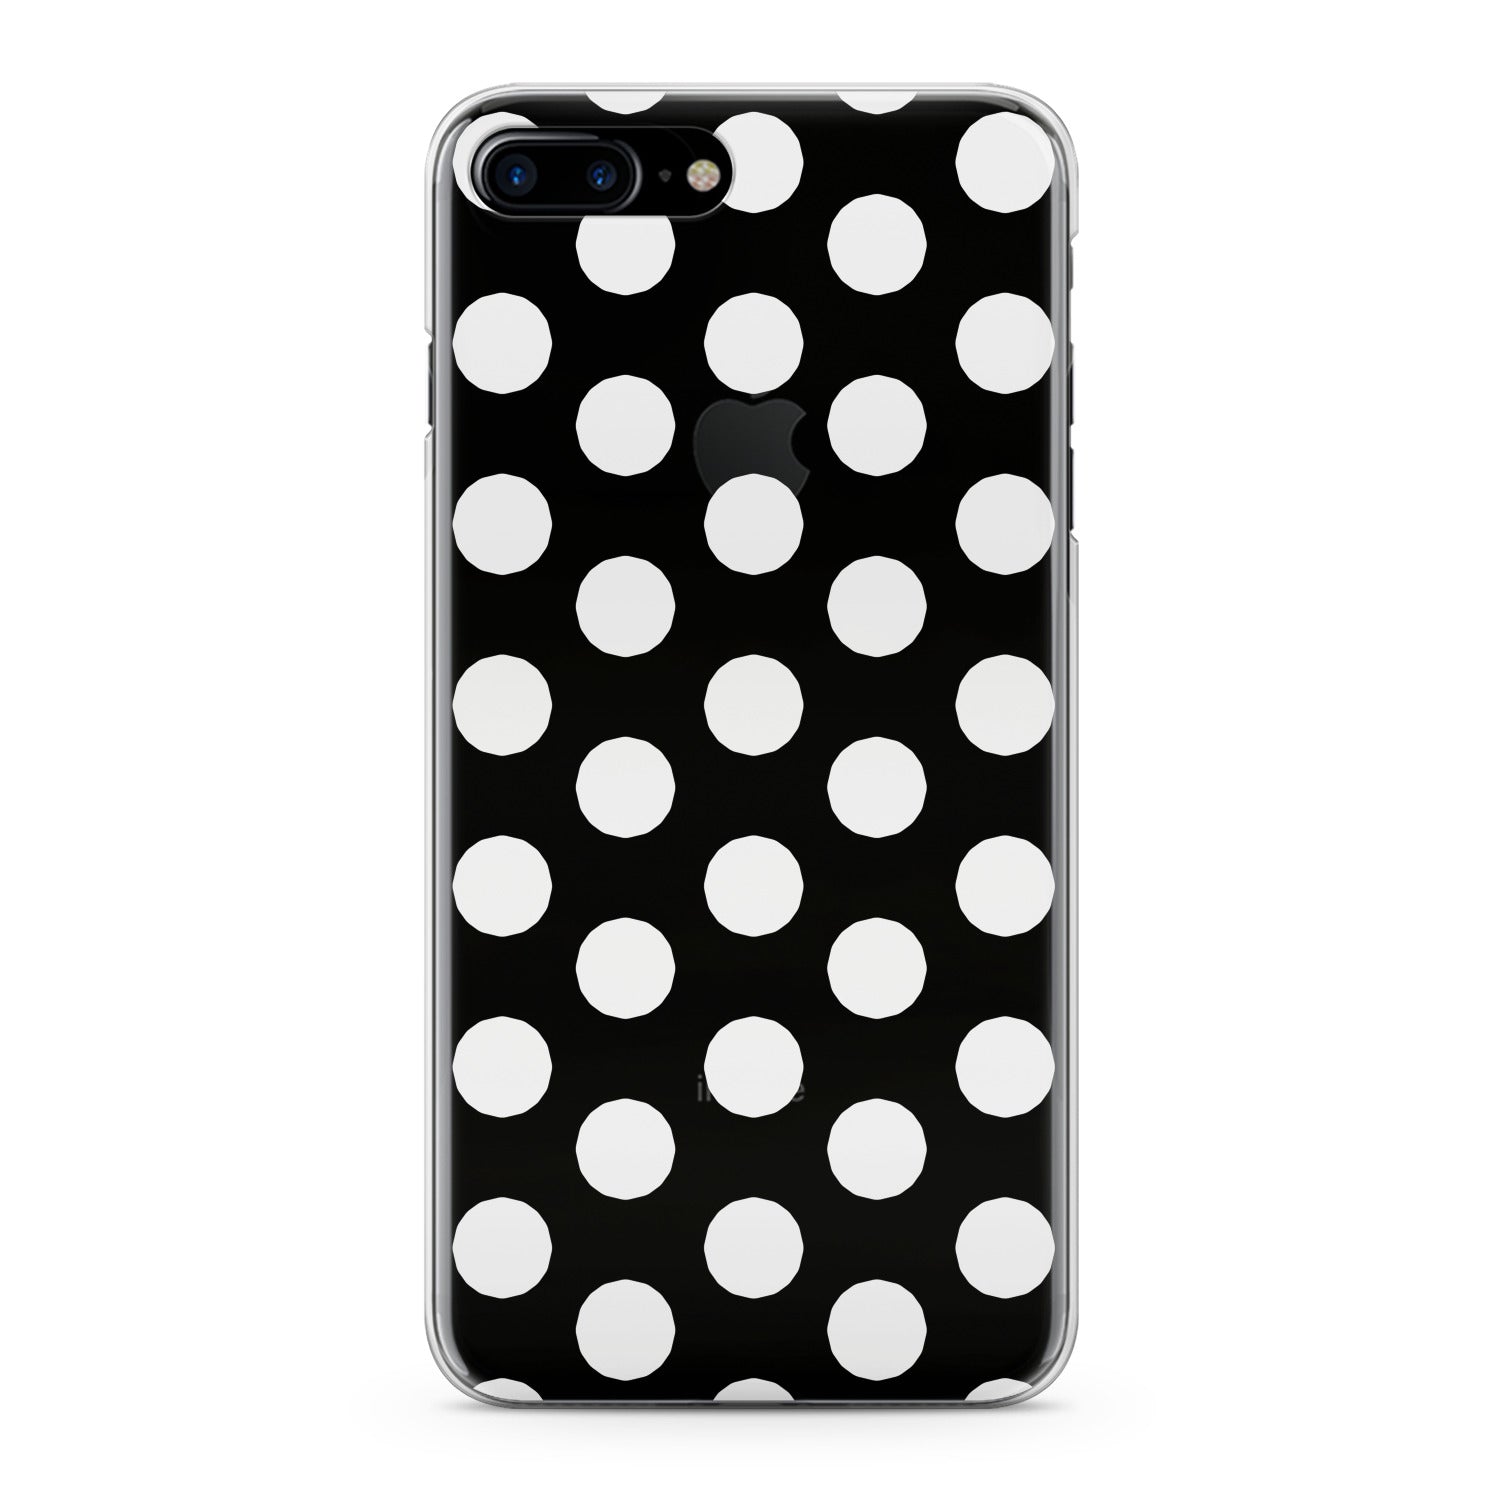 Lex Altern Polka Dot Phone Case for your iPhone & Android phone.